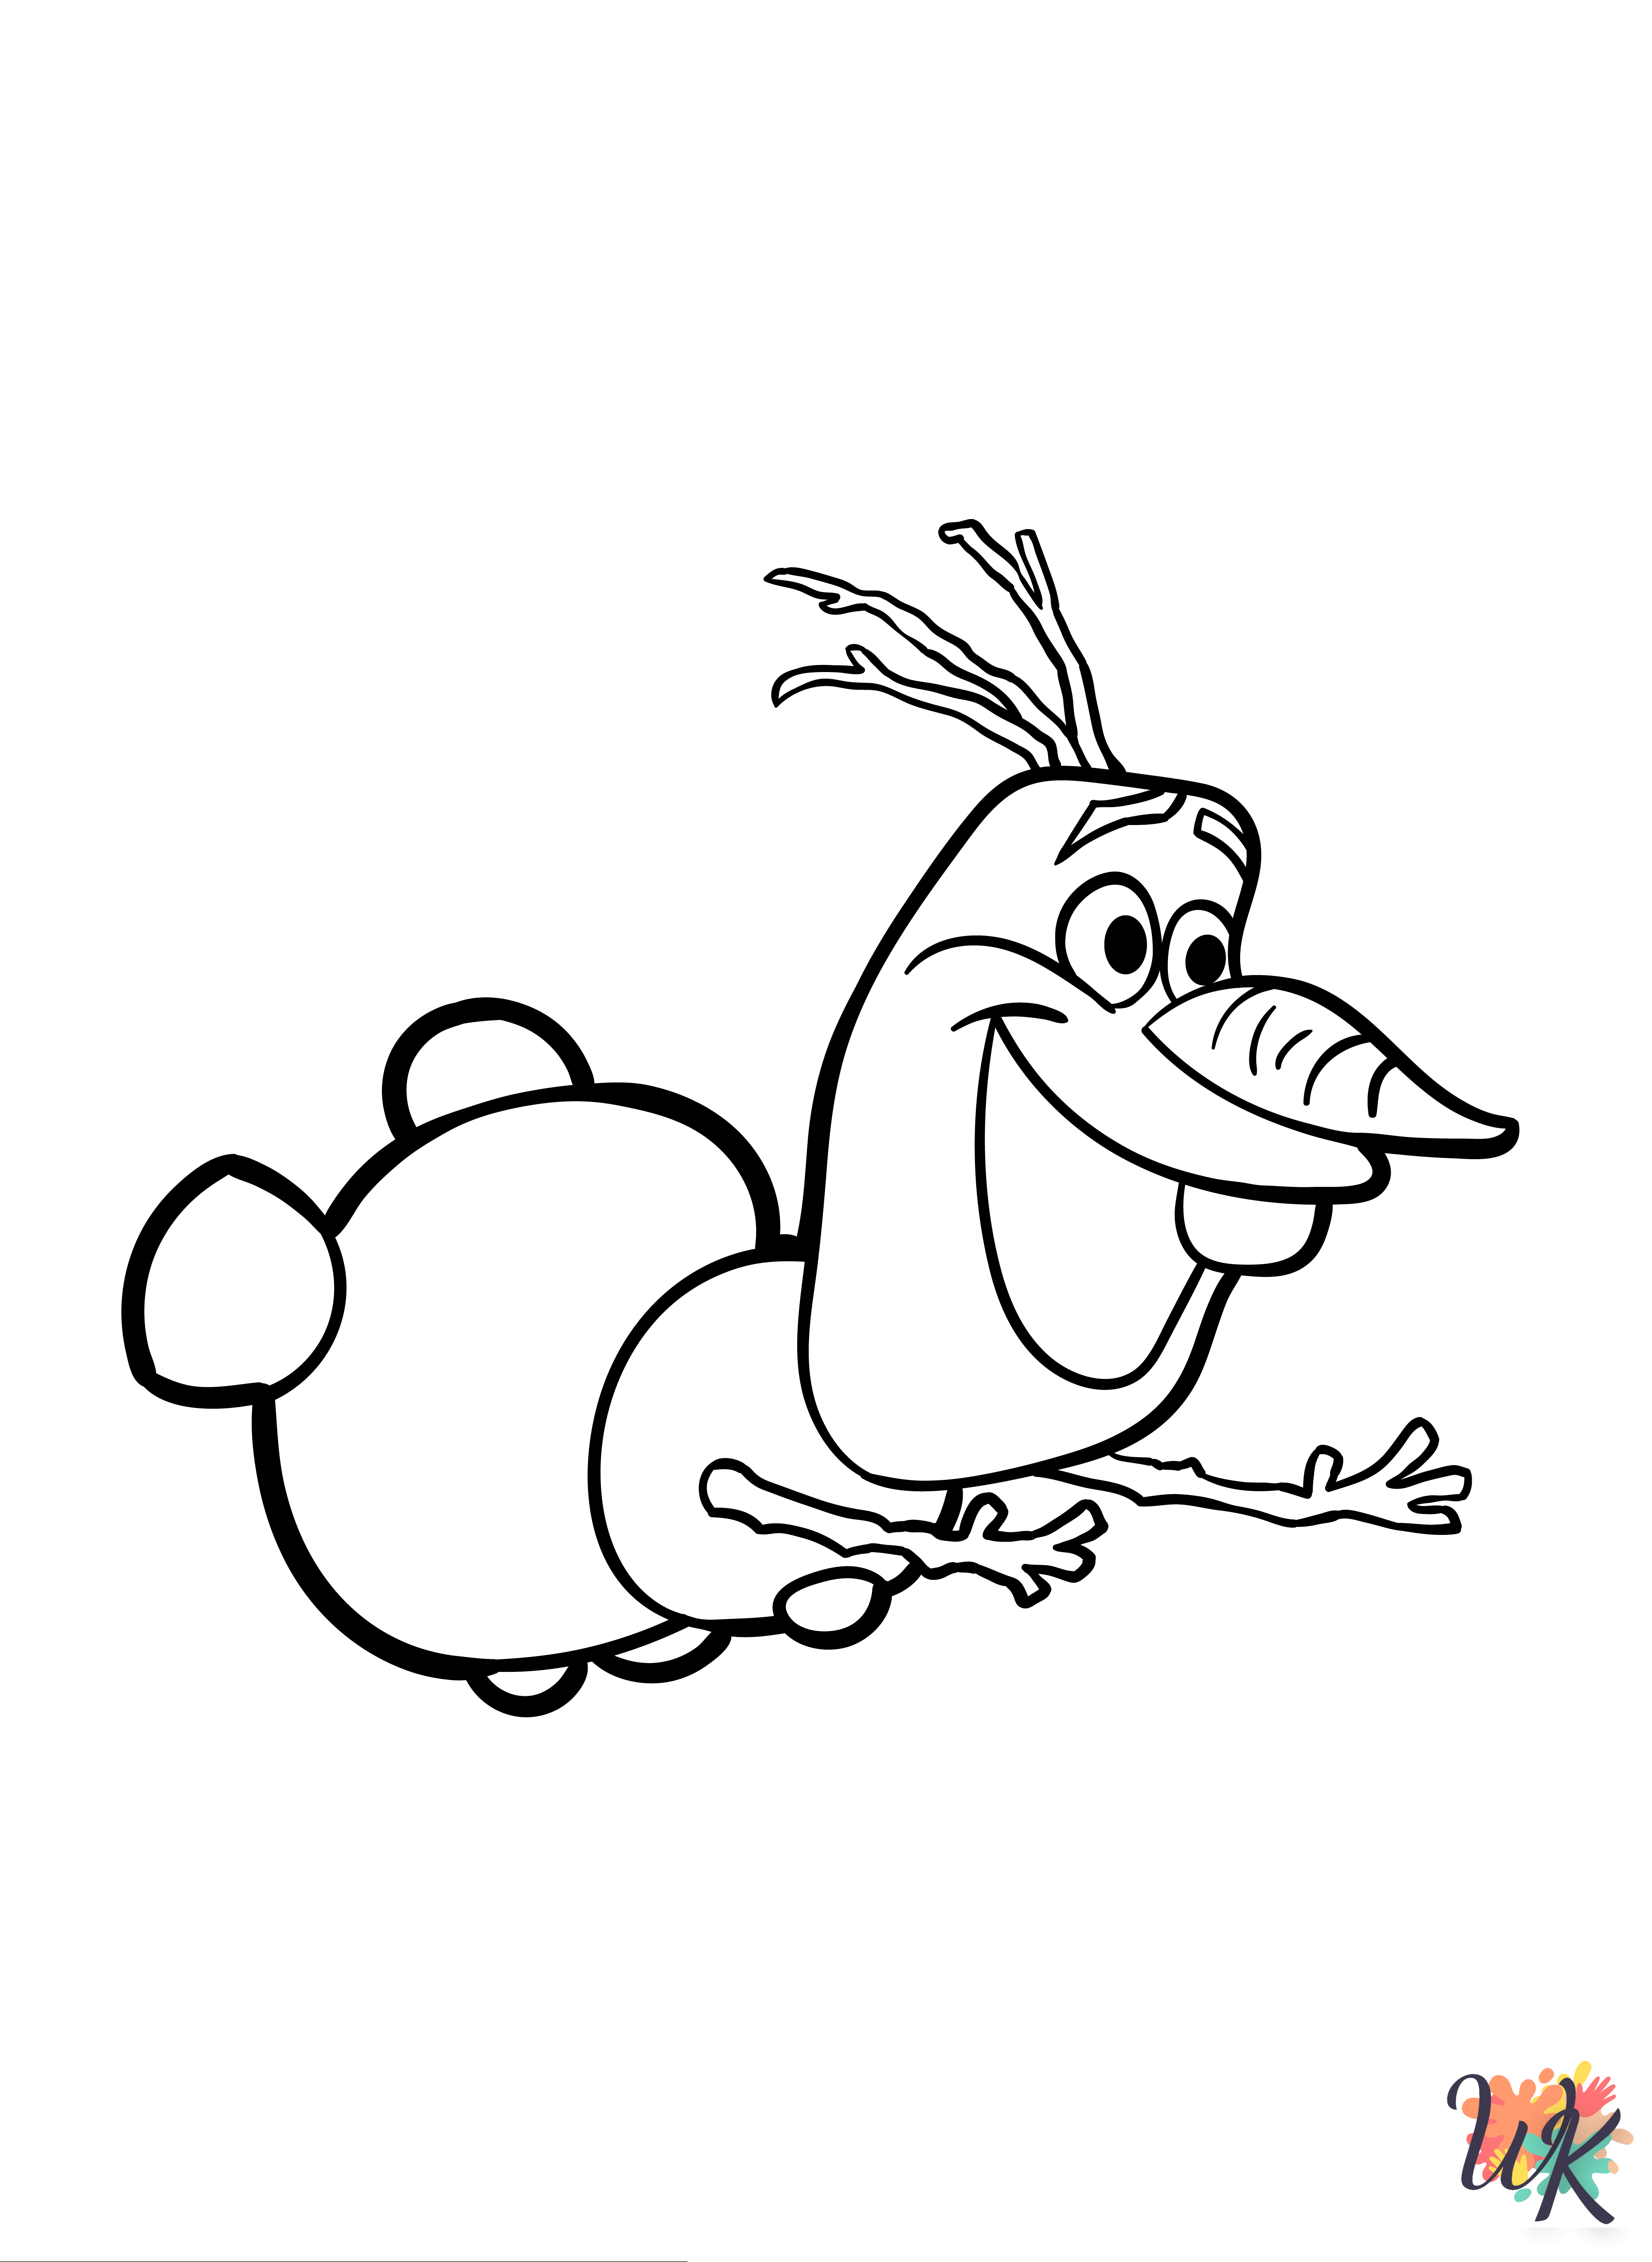 Olaf coloring pages for adults